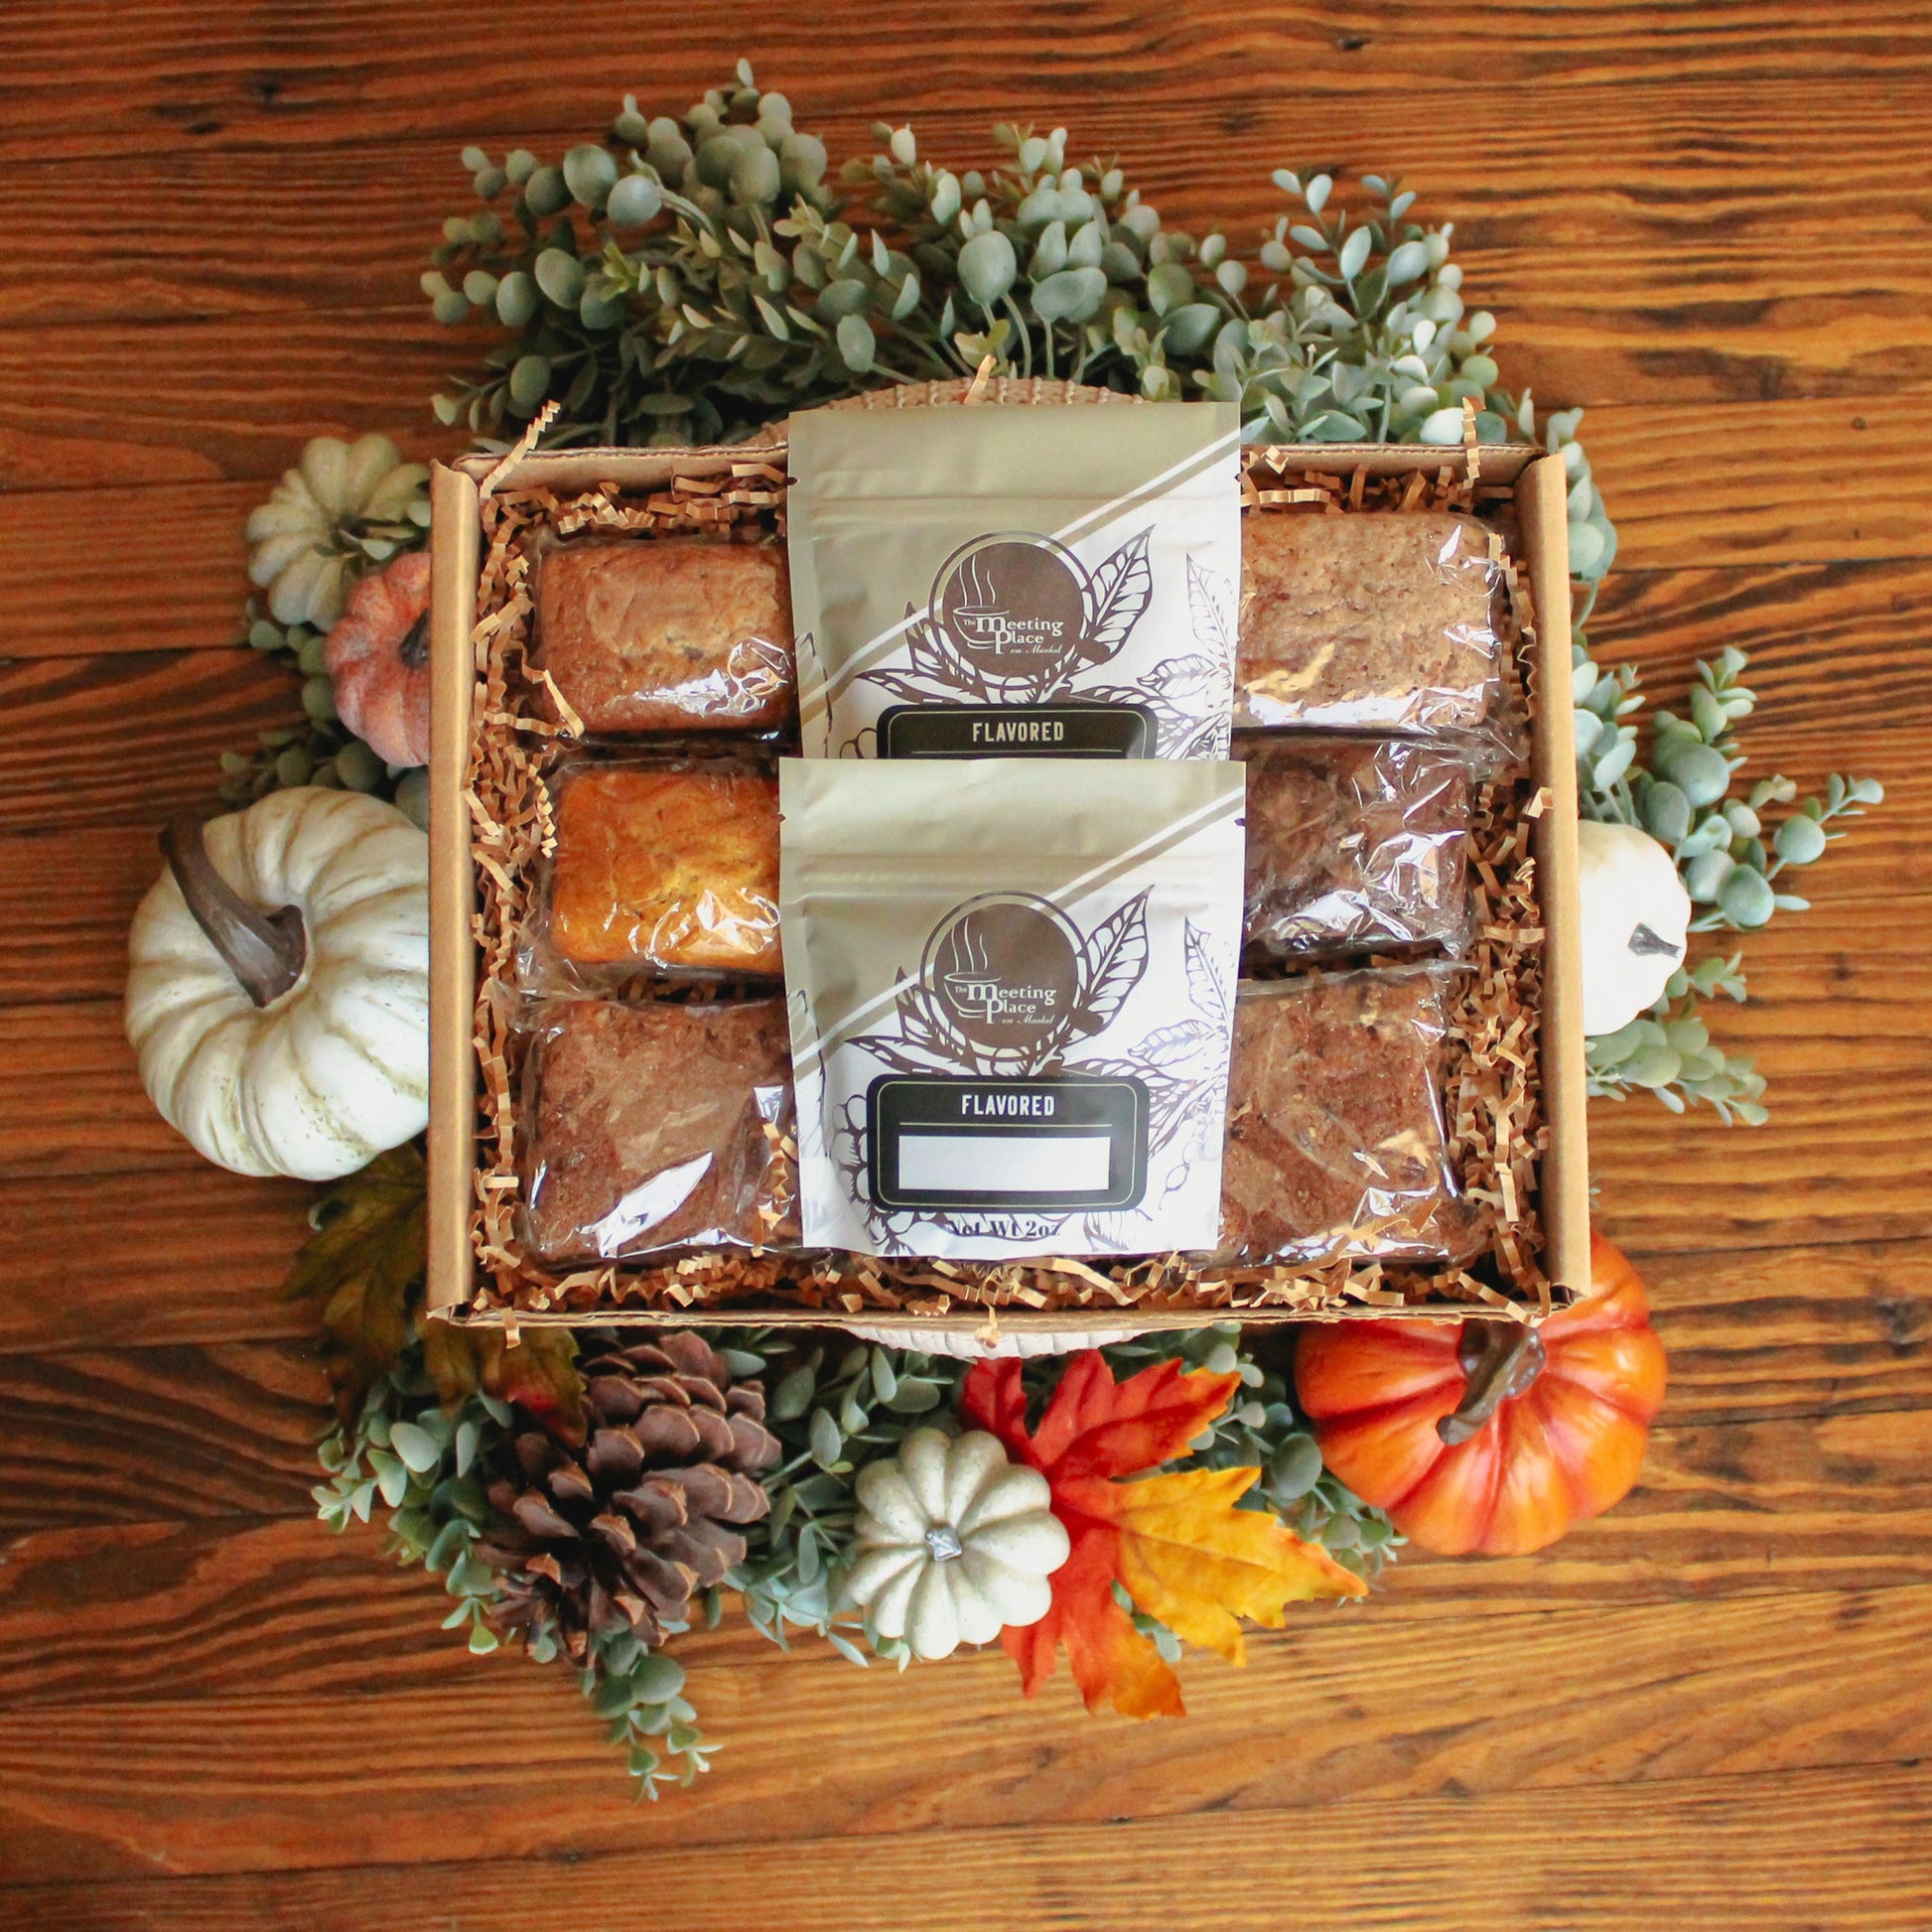 Gift Sets & Baskets in Holiday Food Gifts 